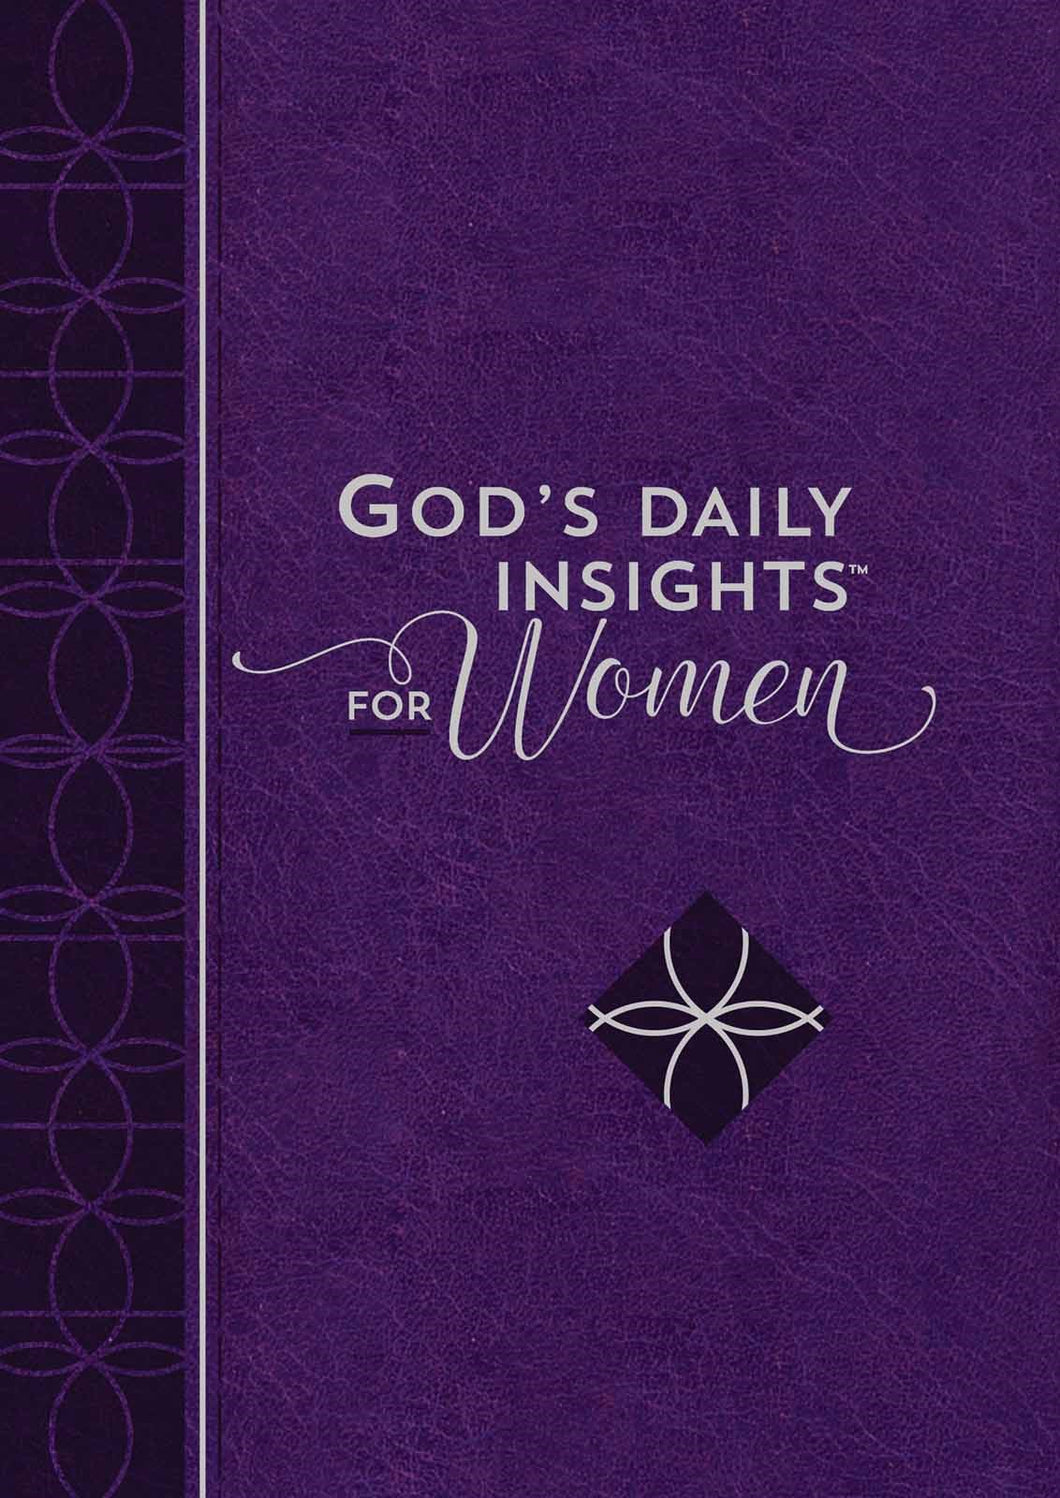 God's Daily Insights For Women